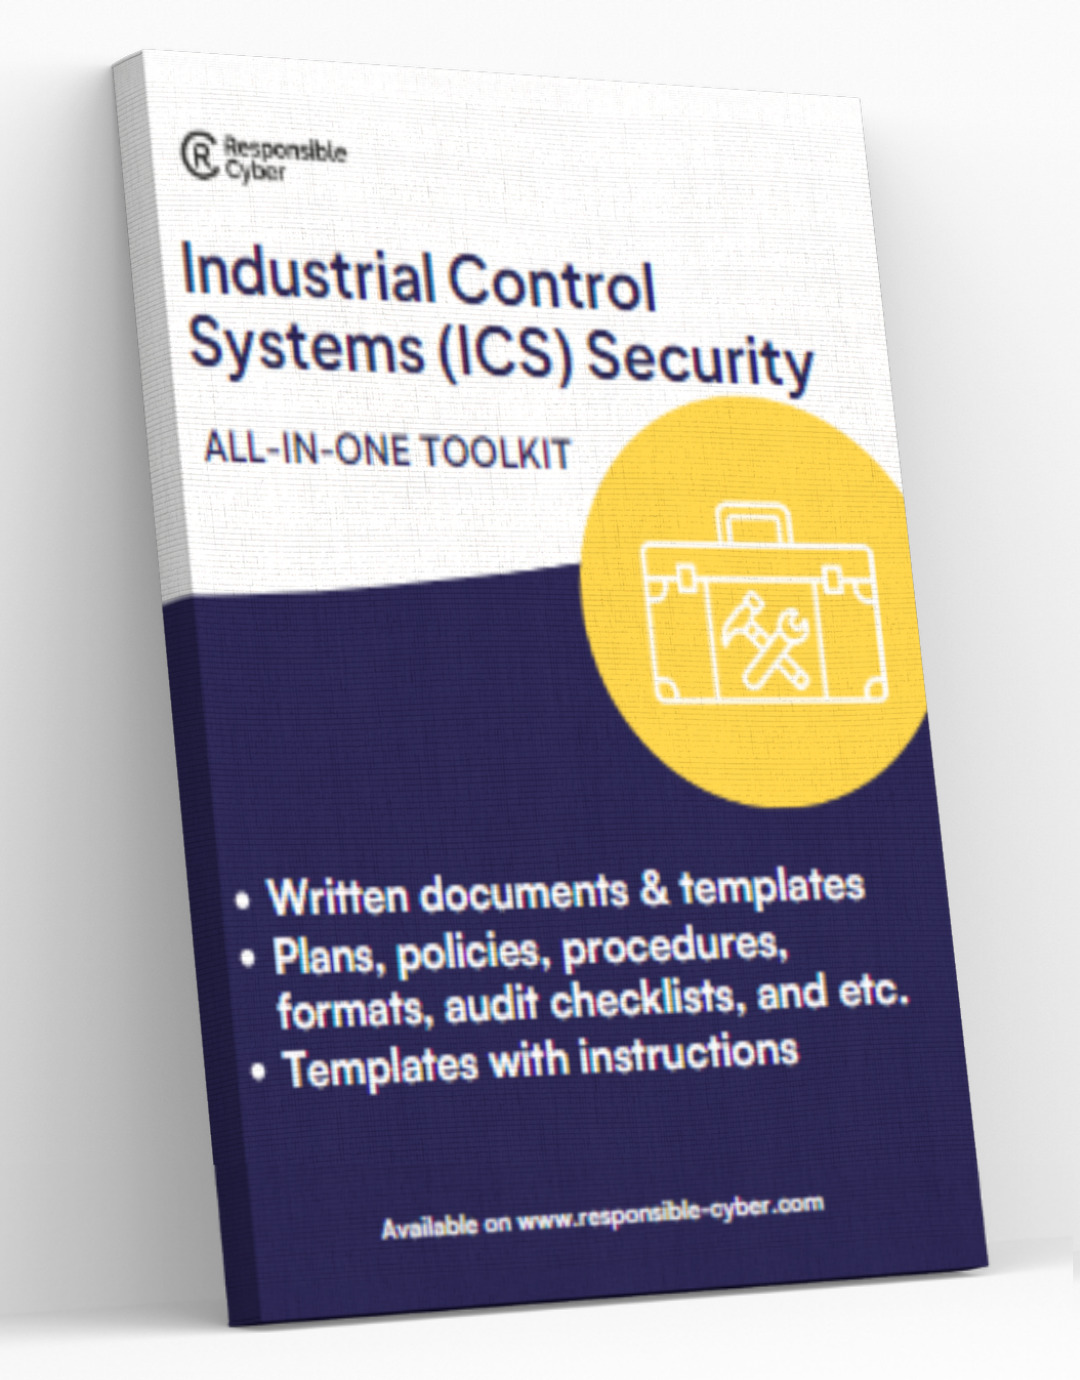 Industrial Control Systems Security Toolkit